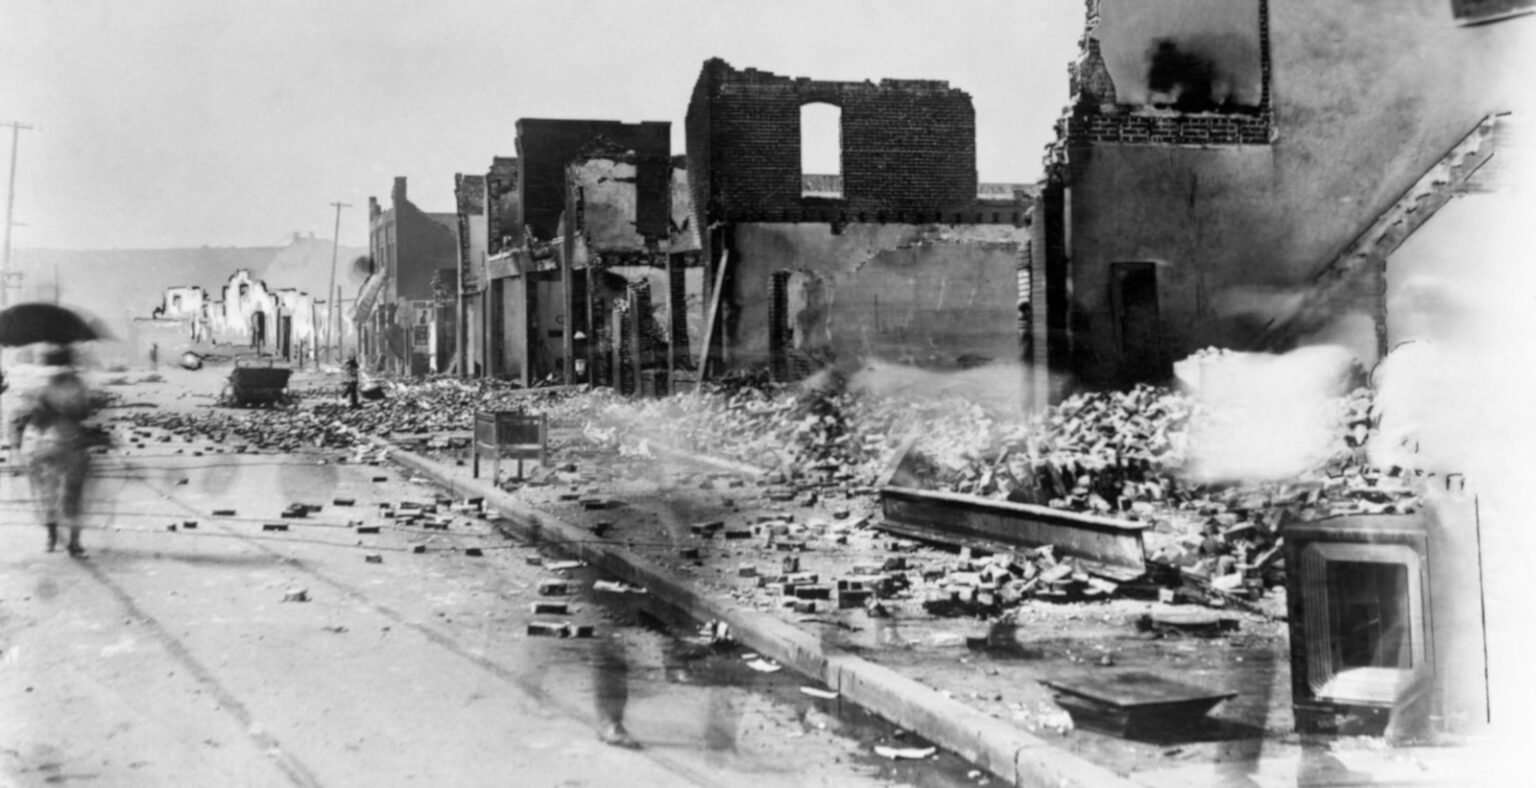 It's been 100 years since the Tulsa Race Massacre took place, so why was its commemoration canceled? Delve into this horrific page in American history.